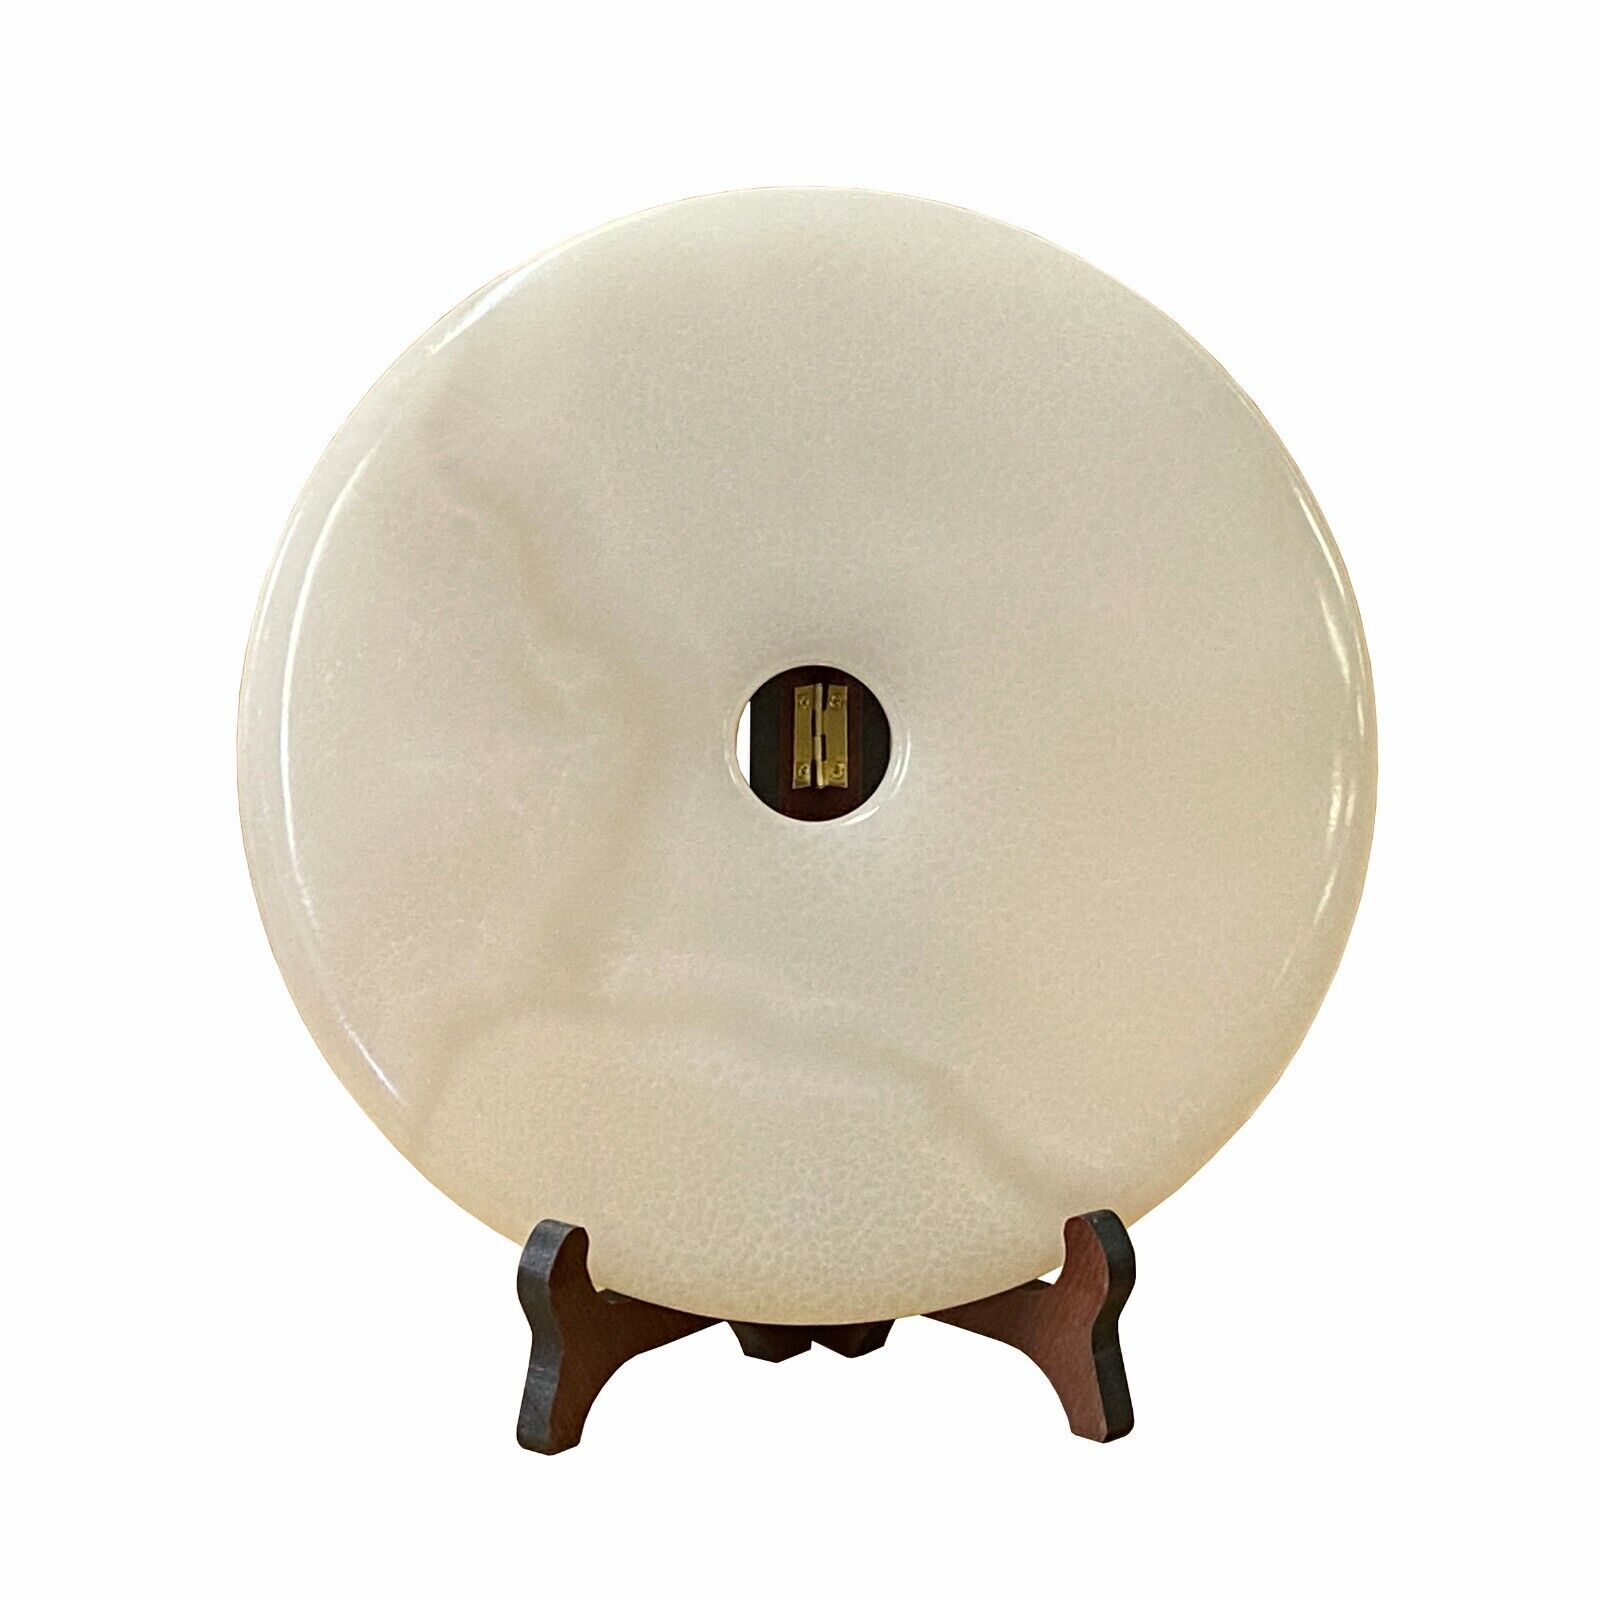 Chinese Natural White Stone Round Fengshui Home Decor Display ws1669